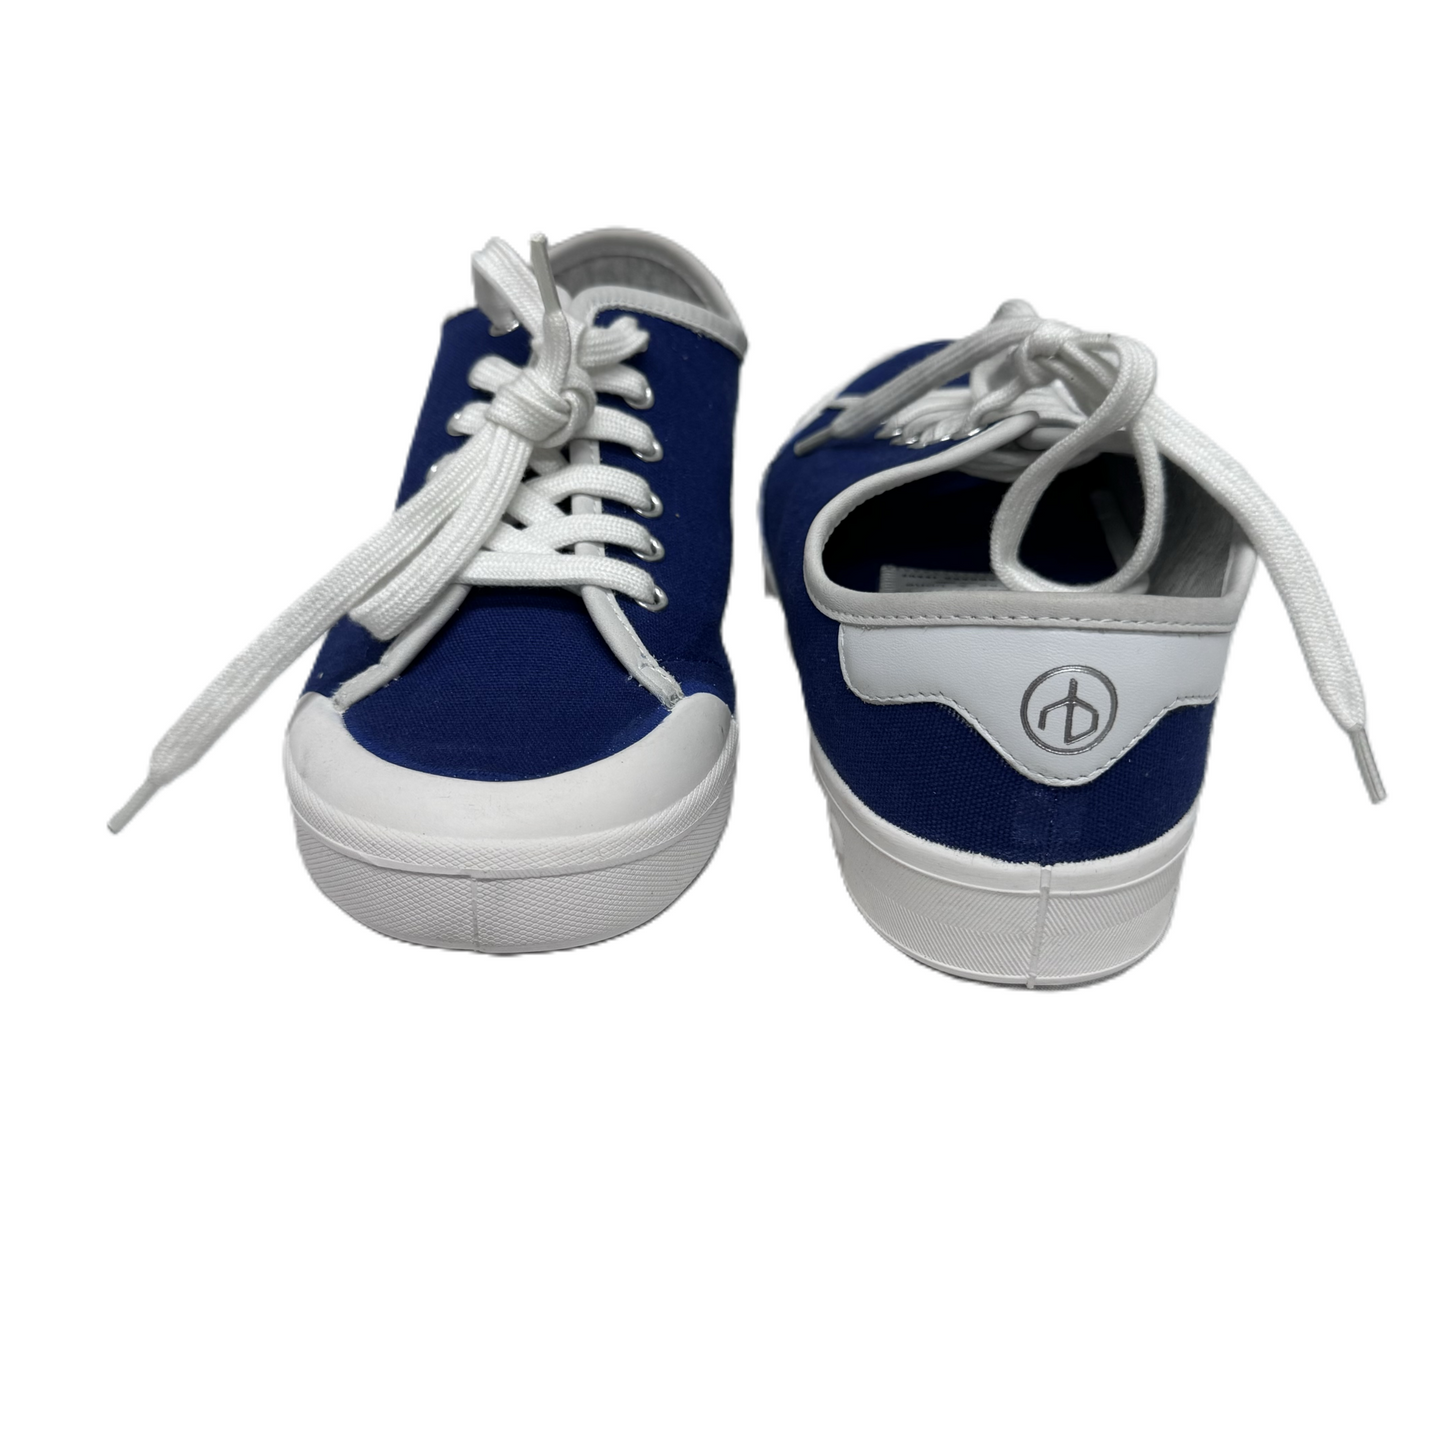 Shoes Sneakers By Rag And Bone  Size: 9